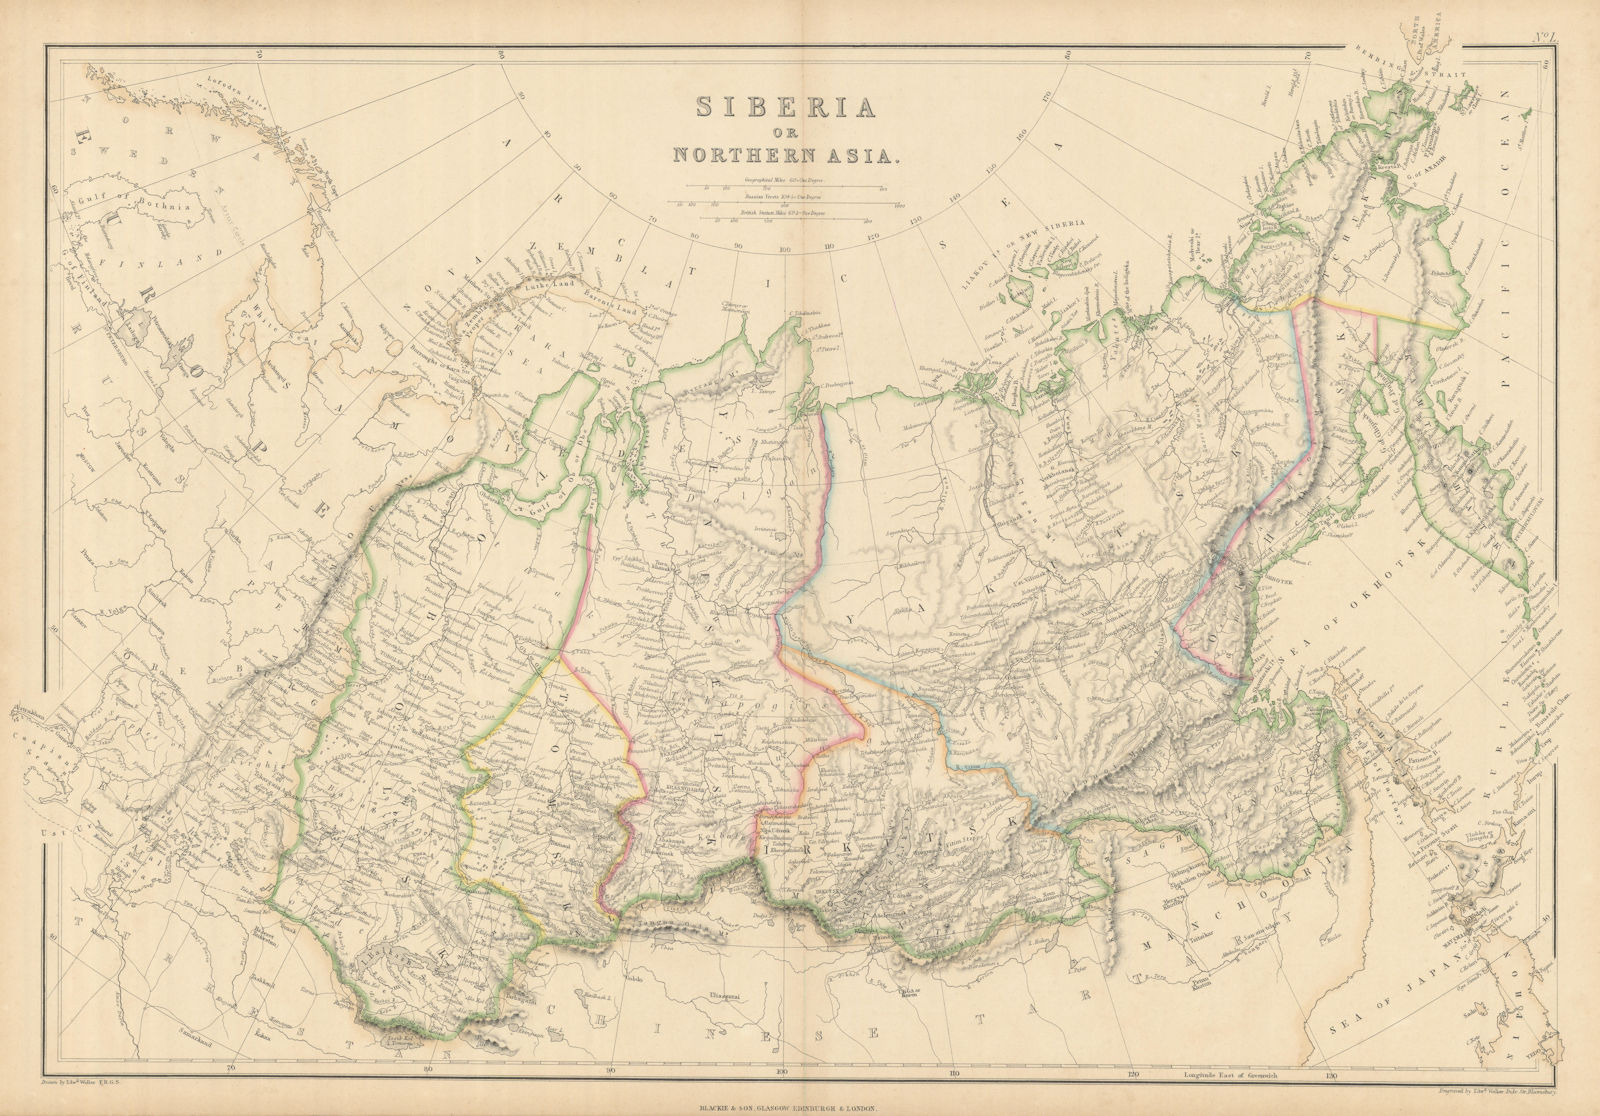 Associate Product Siberia, or Northern Asia by Edward Weller. Russia in Asia 1860 old map